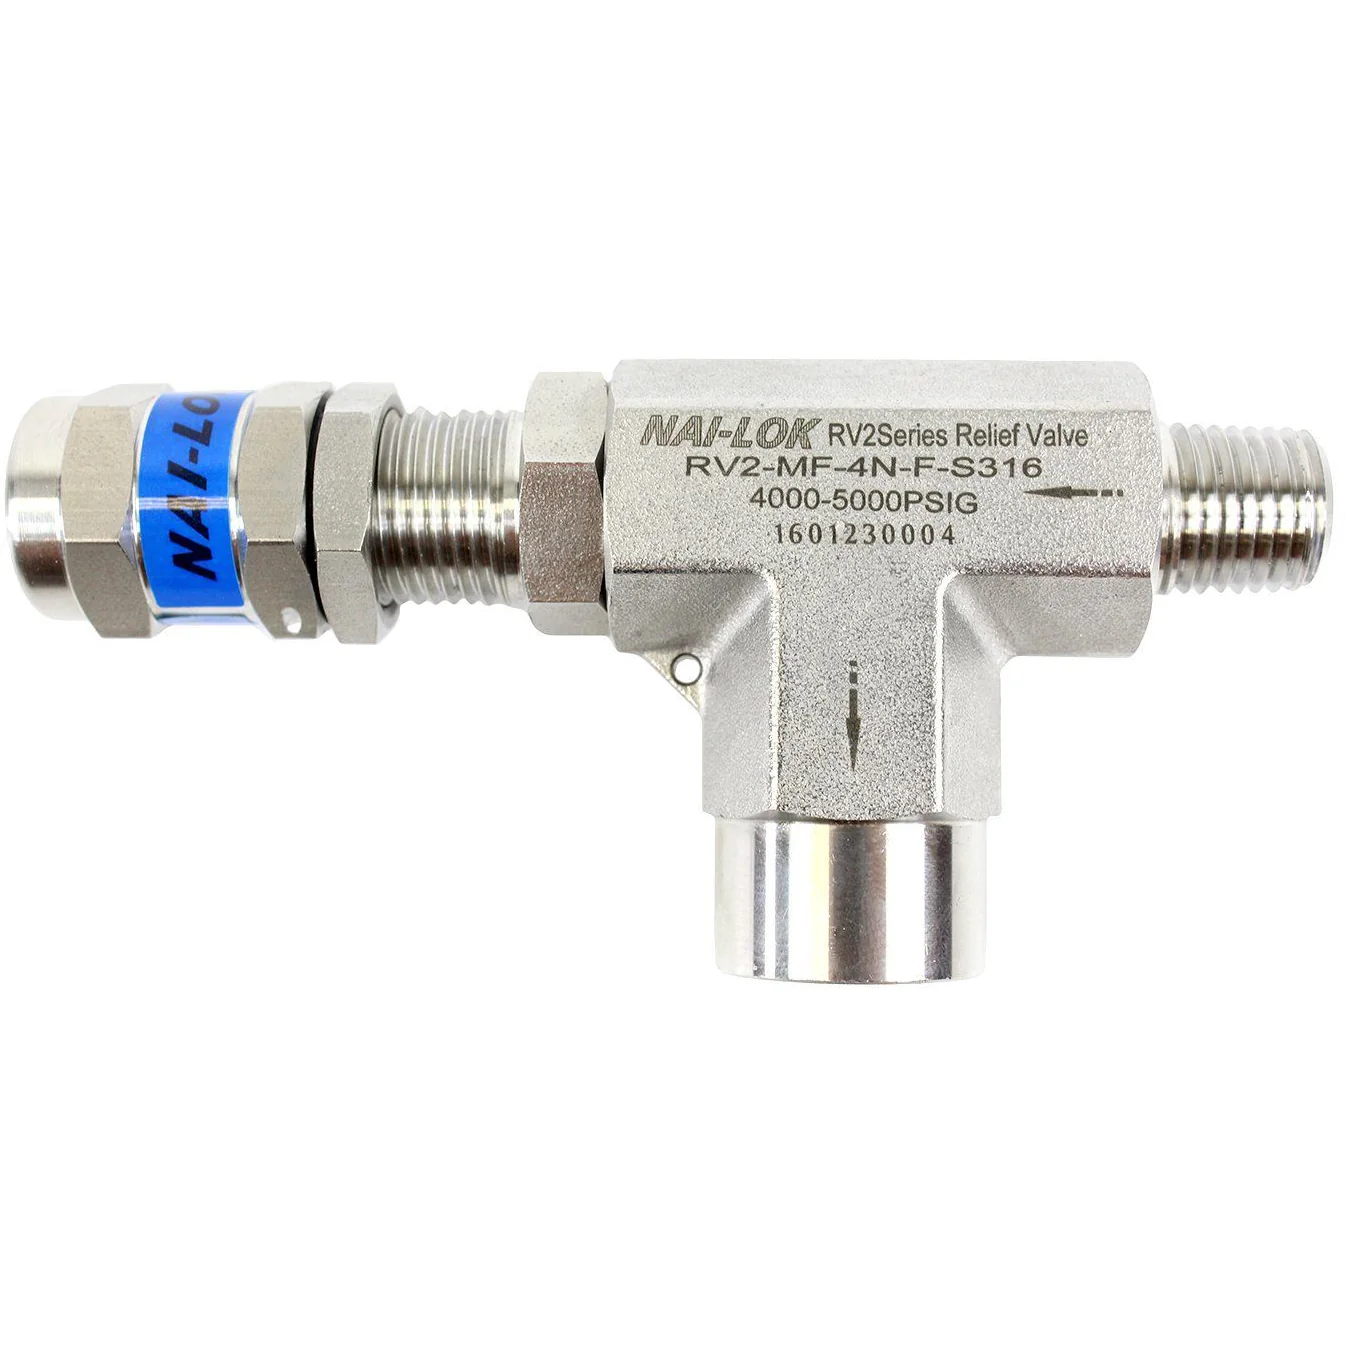 what type of stainless steel on Manufacturer: Nai-Lok  Nai-Lok - Adjustable Pressure Relief Valve SKU: RV2-5000